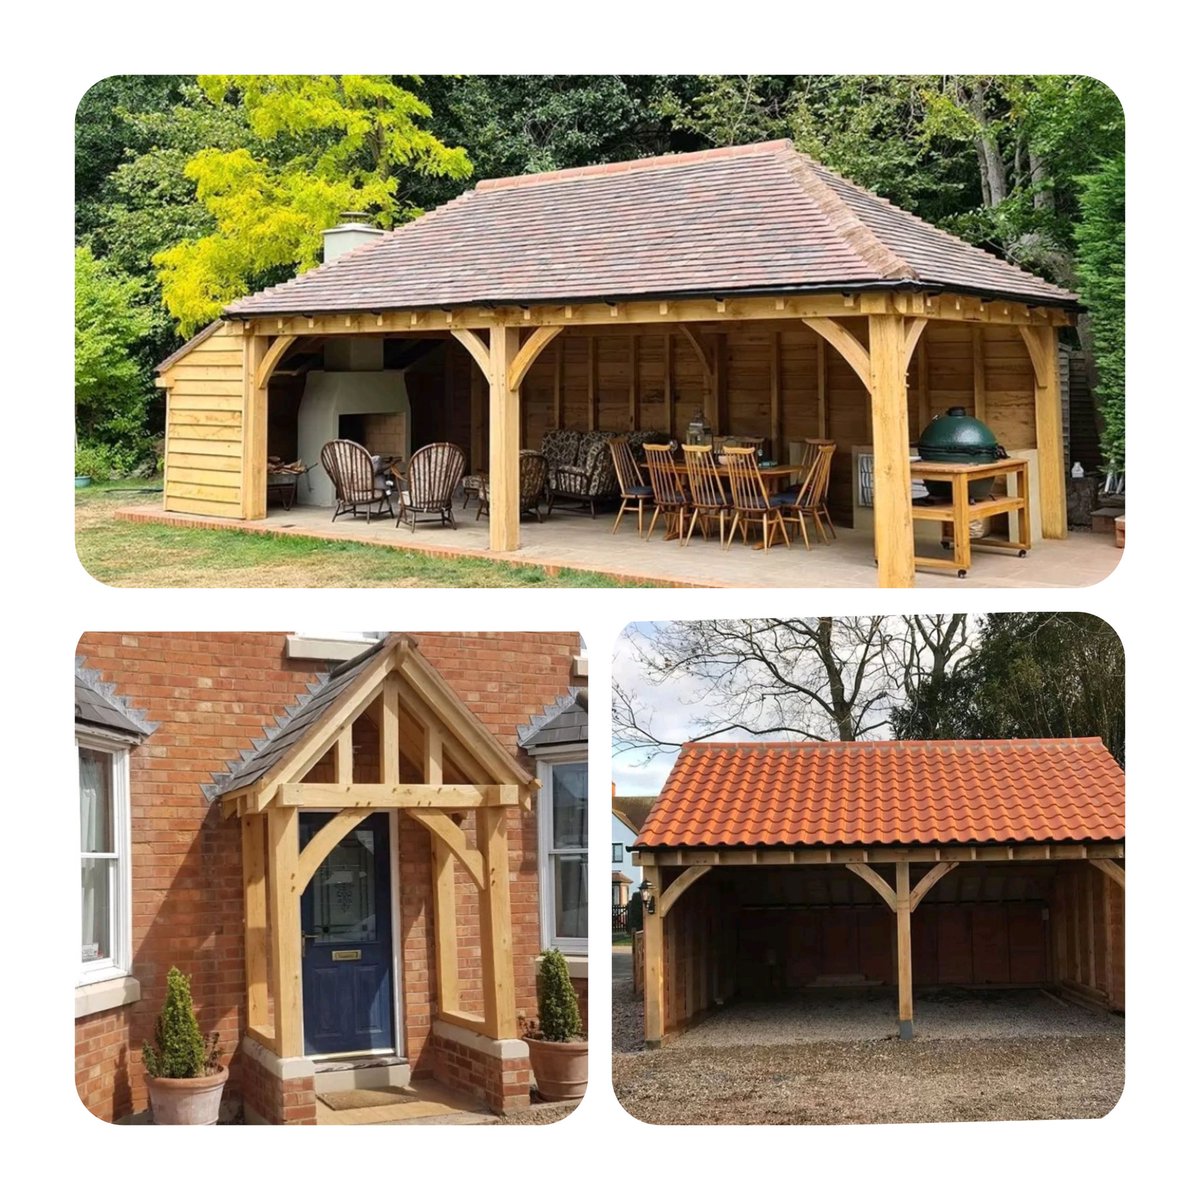 🌳 Exploring the Beauty of Oak in Your Next Project! Let's collaborate to bring the warmth & character of oak to more construction projects.

#PropertyDevelopment #OakFrame #Craftsmanship #ReferralsWelcome #CollaborationOpportunity #Oak #ContactUs #Architects #Landscape #bespoke